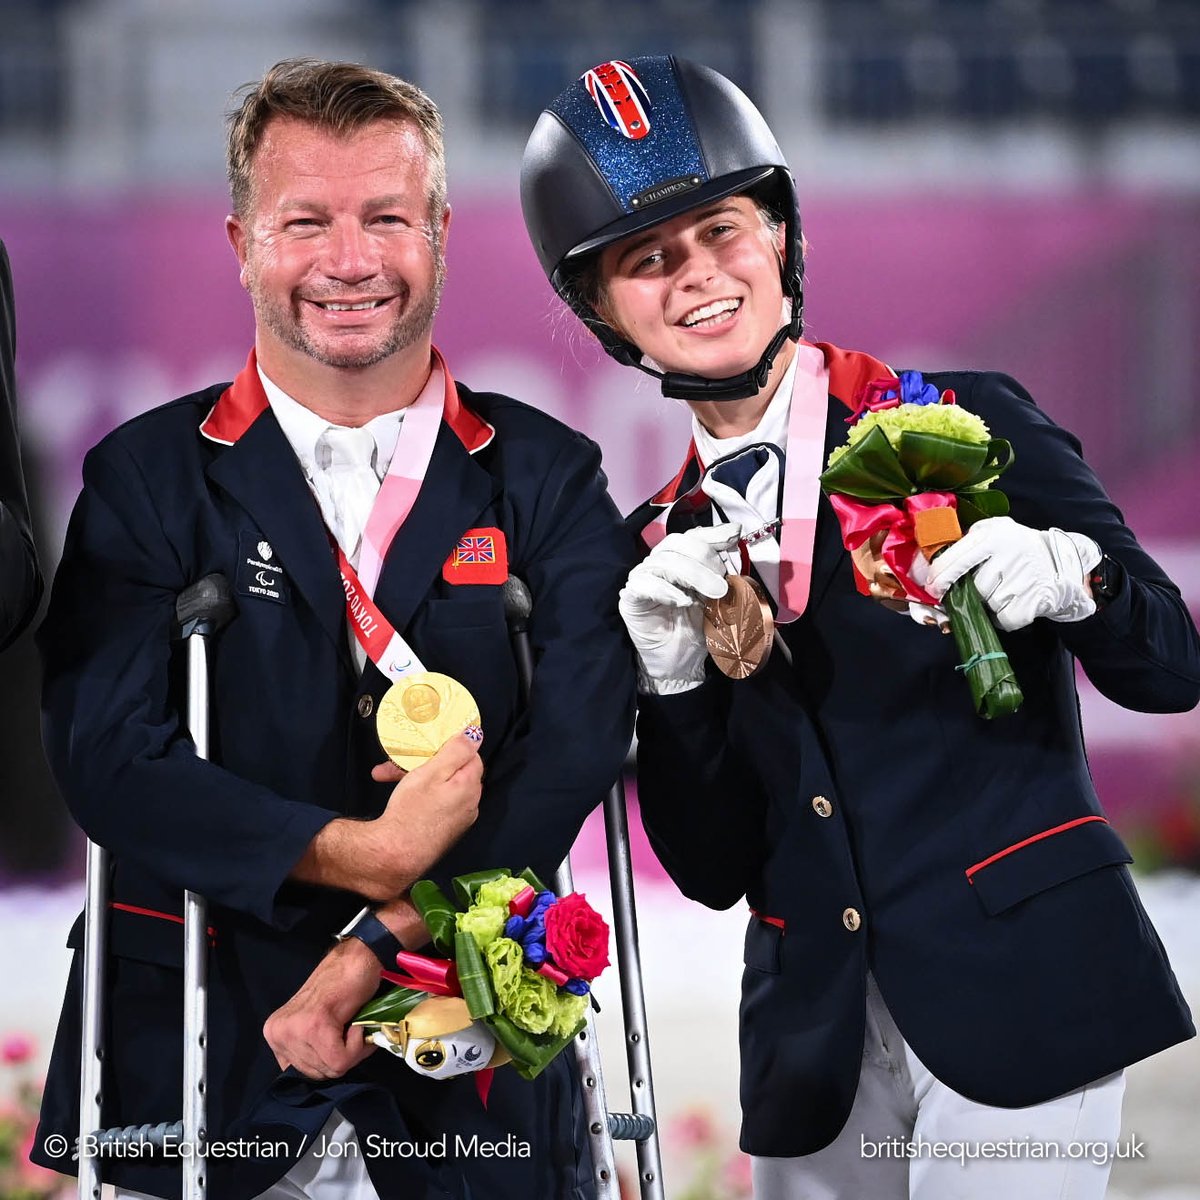 What a magnificent final night at Equestrian Park – gold for @SirLeePearson, silver for @NBakerParaRider and bronze for Georgia Wilson. @Tokyo2020, it's been a pleasure! 

#ParaEquestrian #ParaDressage #ParalympicsGB #Tokyo2020 #ImpossibleToIgnore #UnitedByEmotion